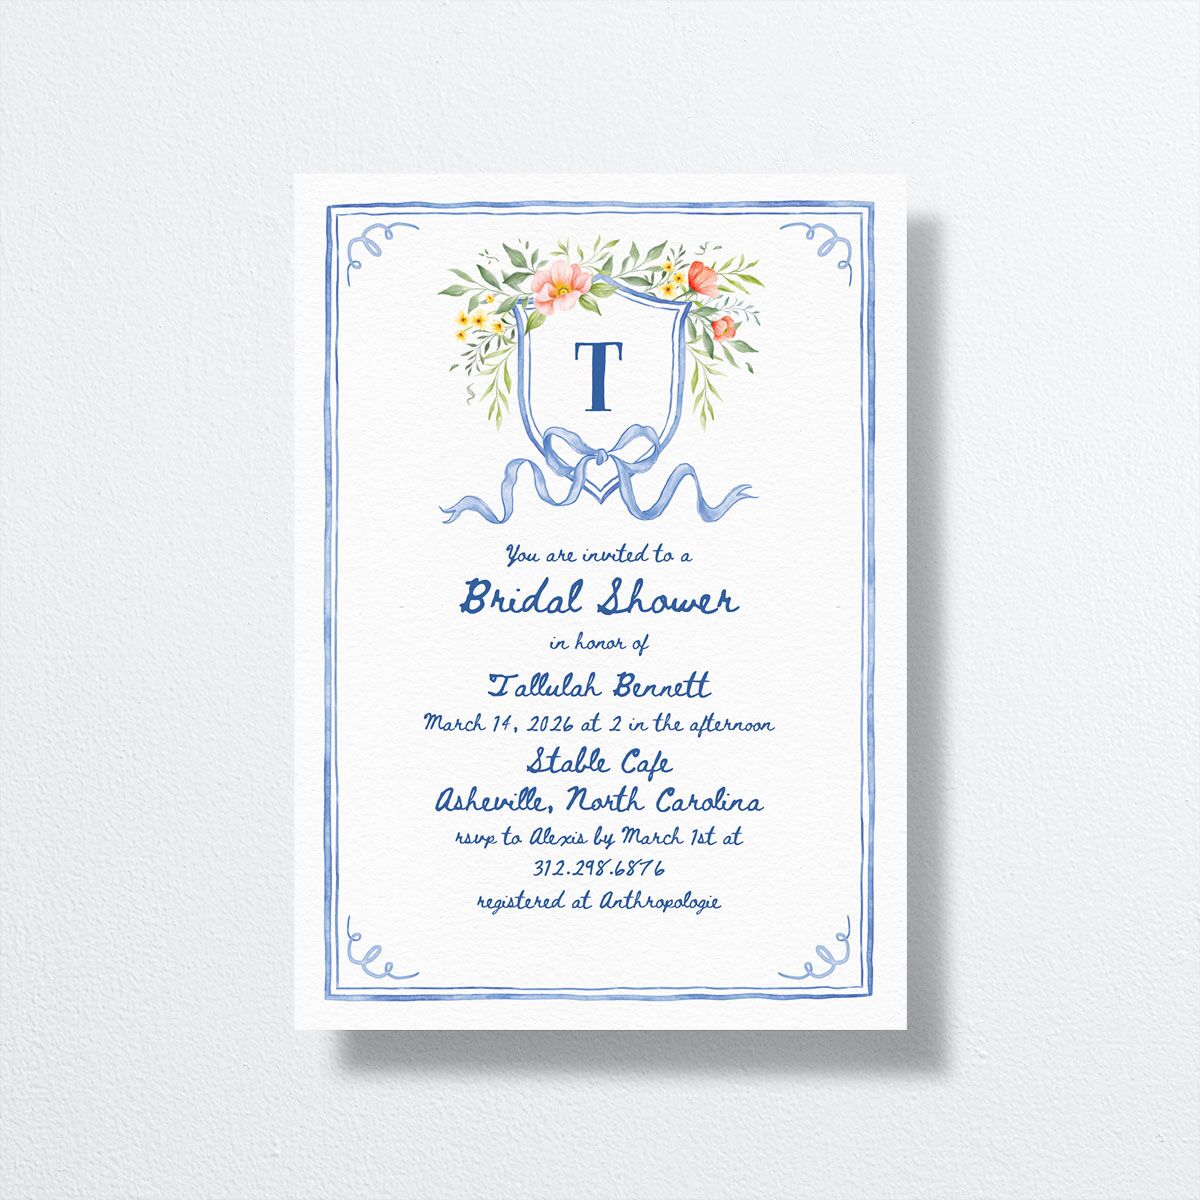 Countryside Crest Bridal Shower Invitations front in blue